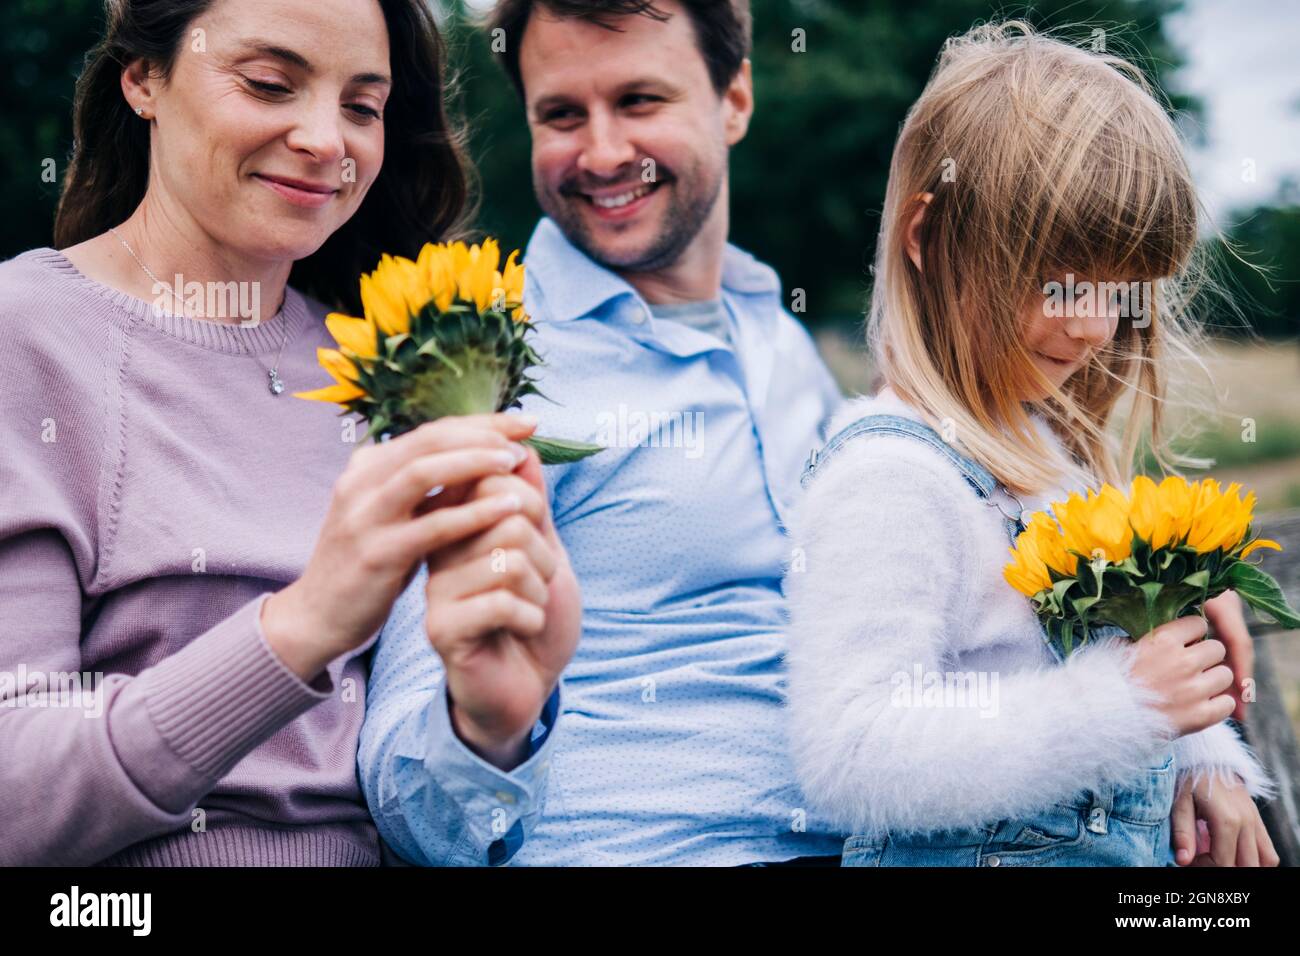 Woman and girl holding sunflower while sitting with man at park Stock Photo